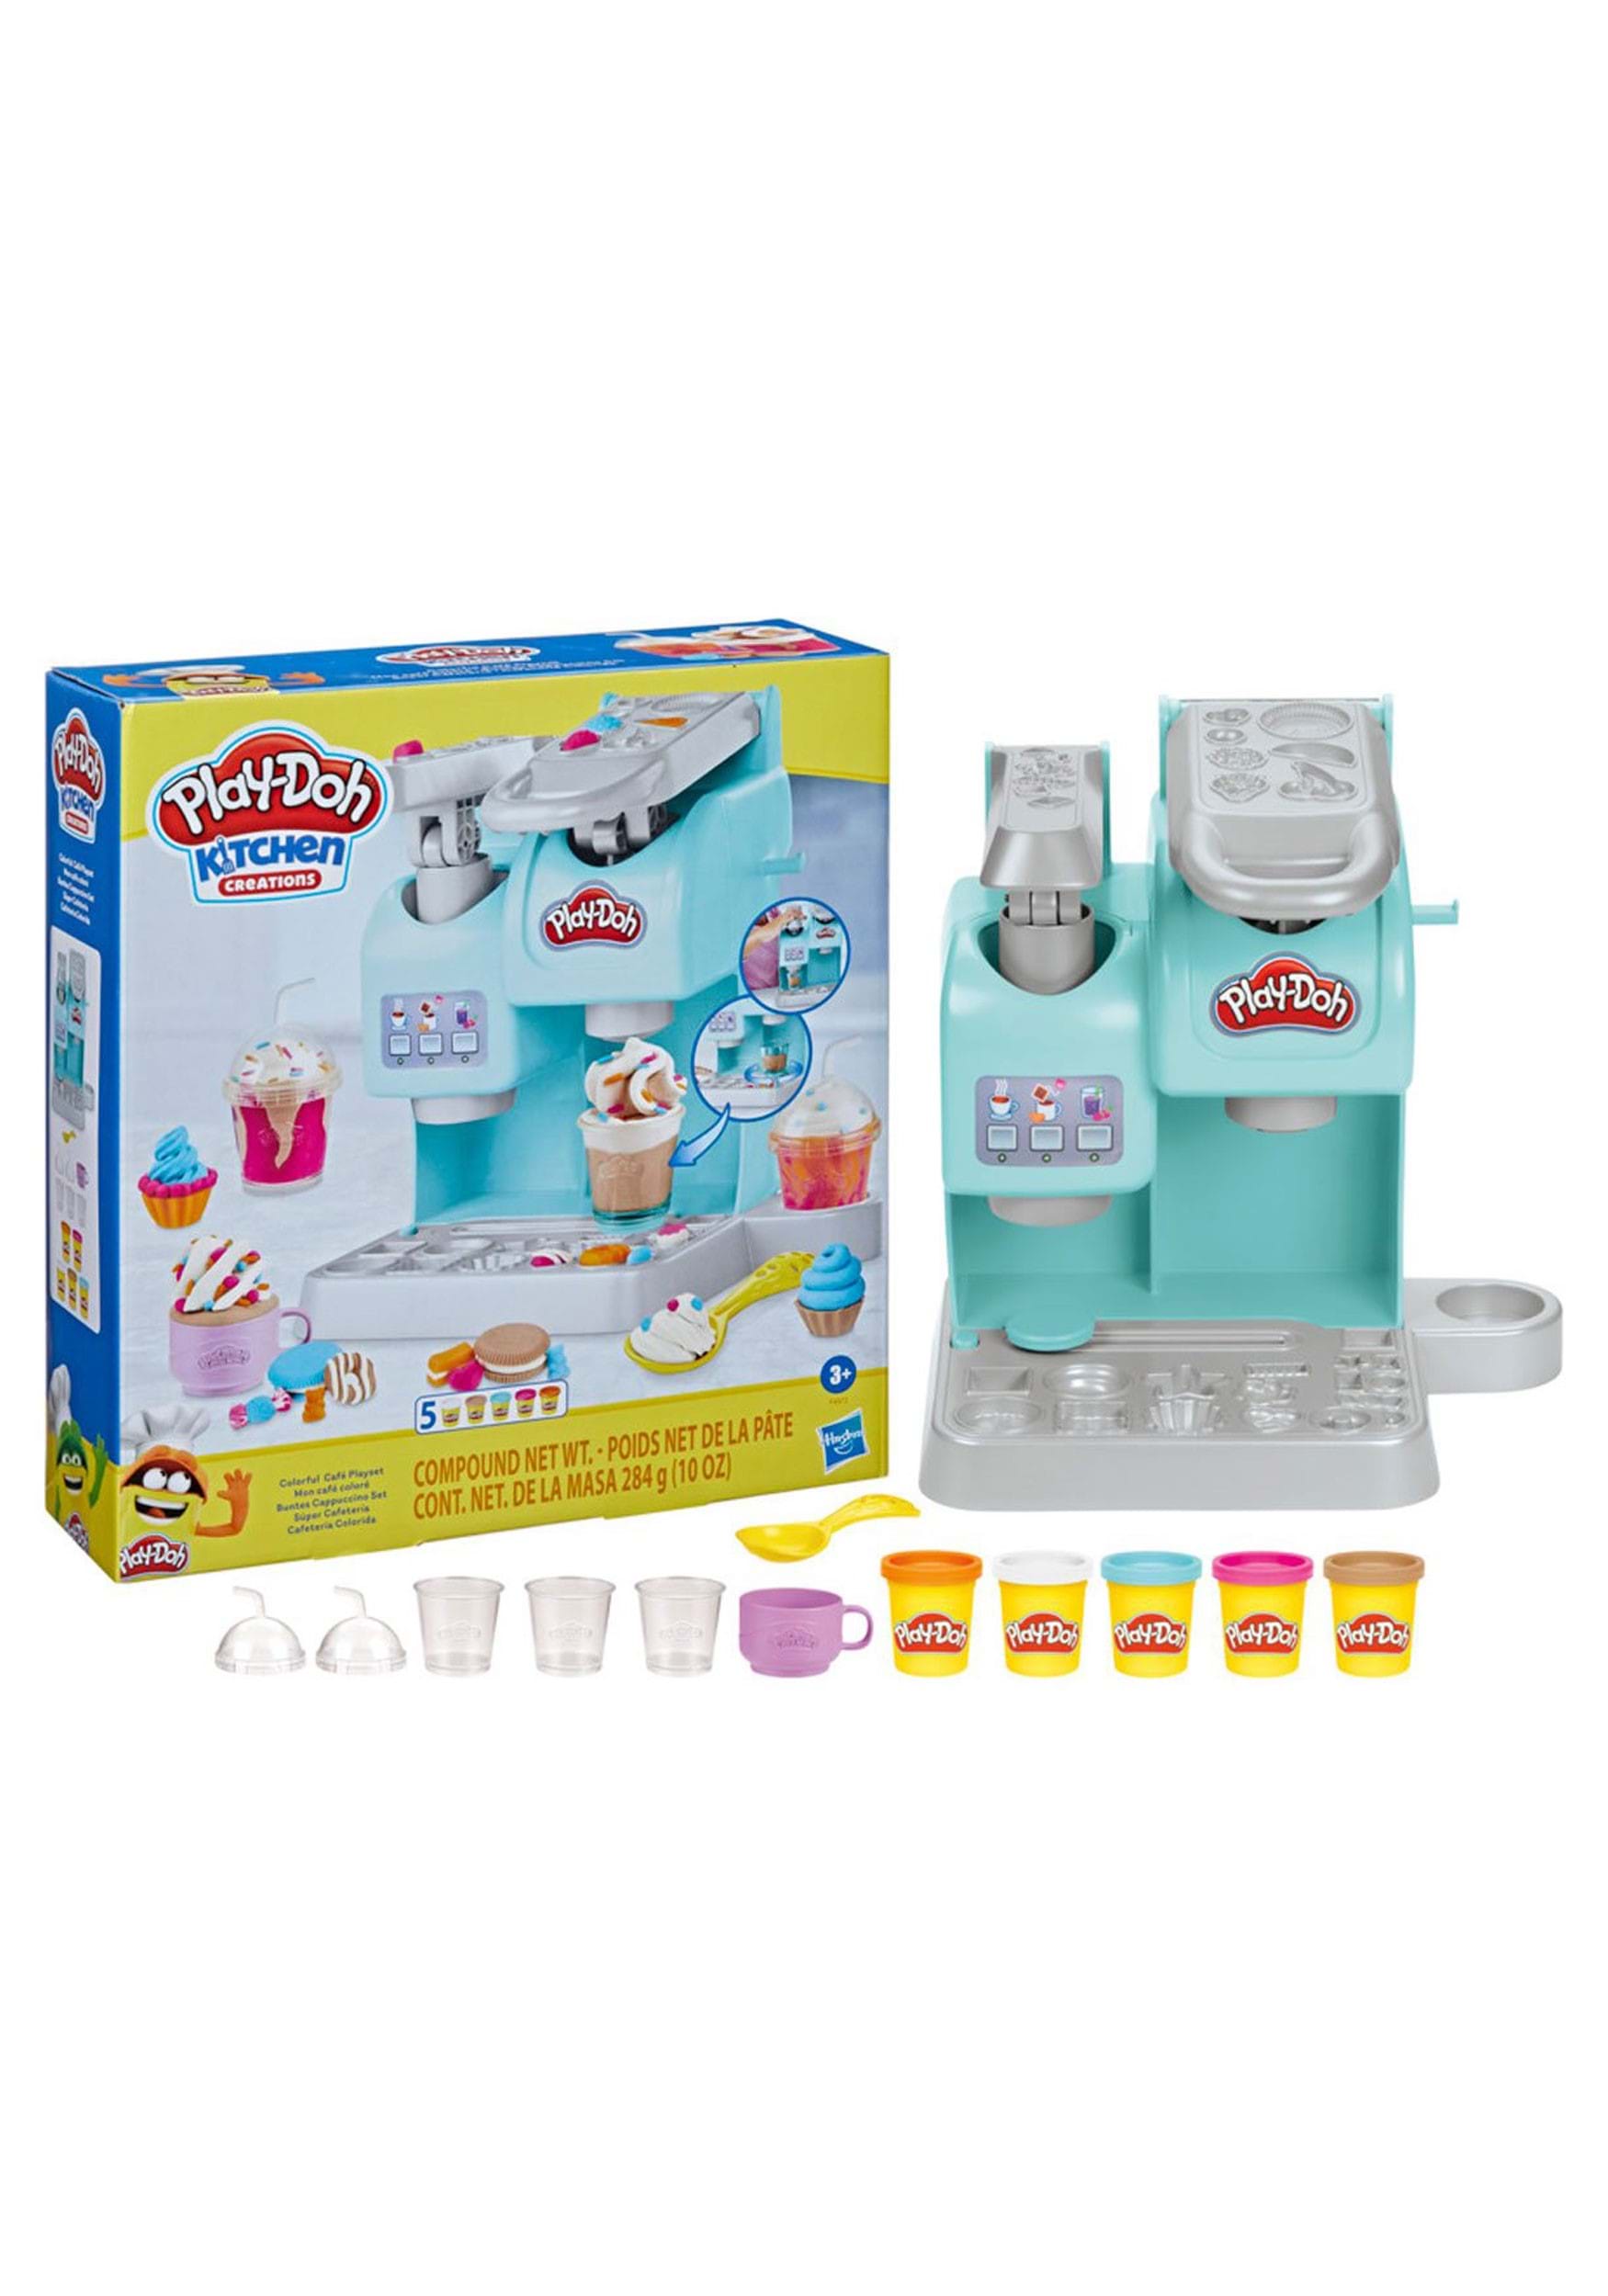 Play-Doh Colorful Cafe Playset toy